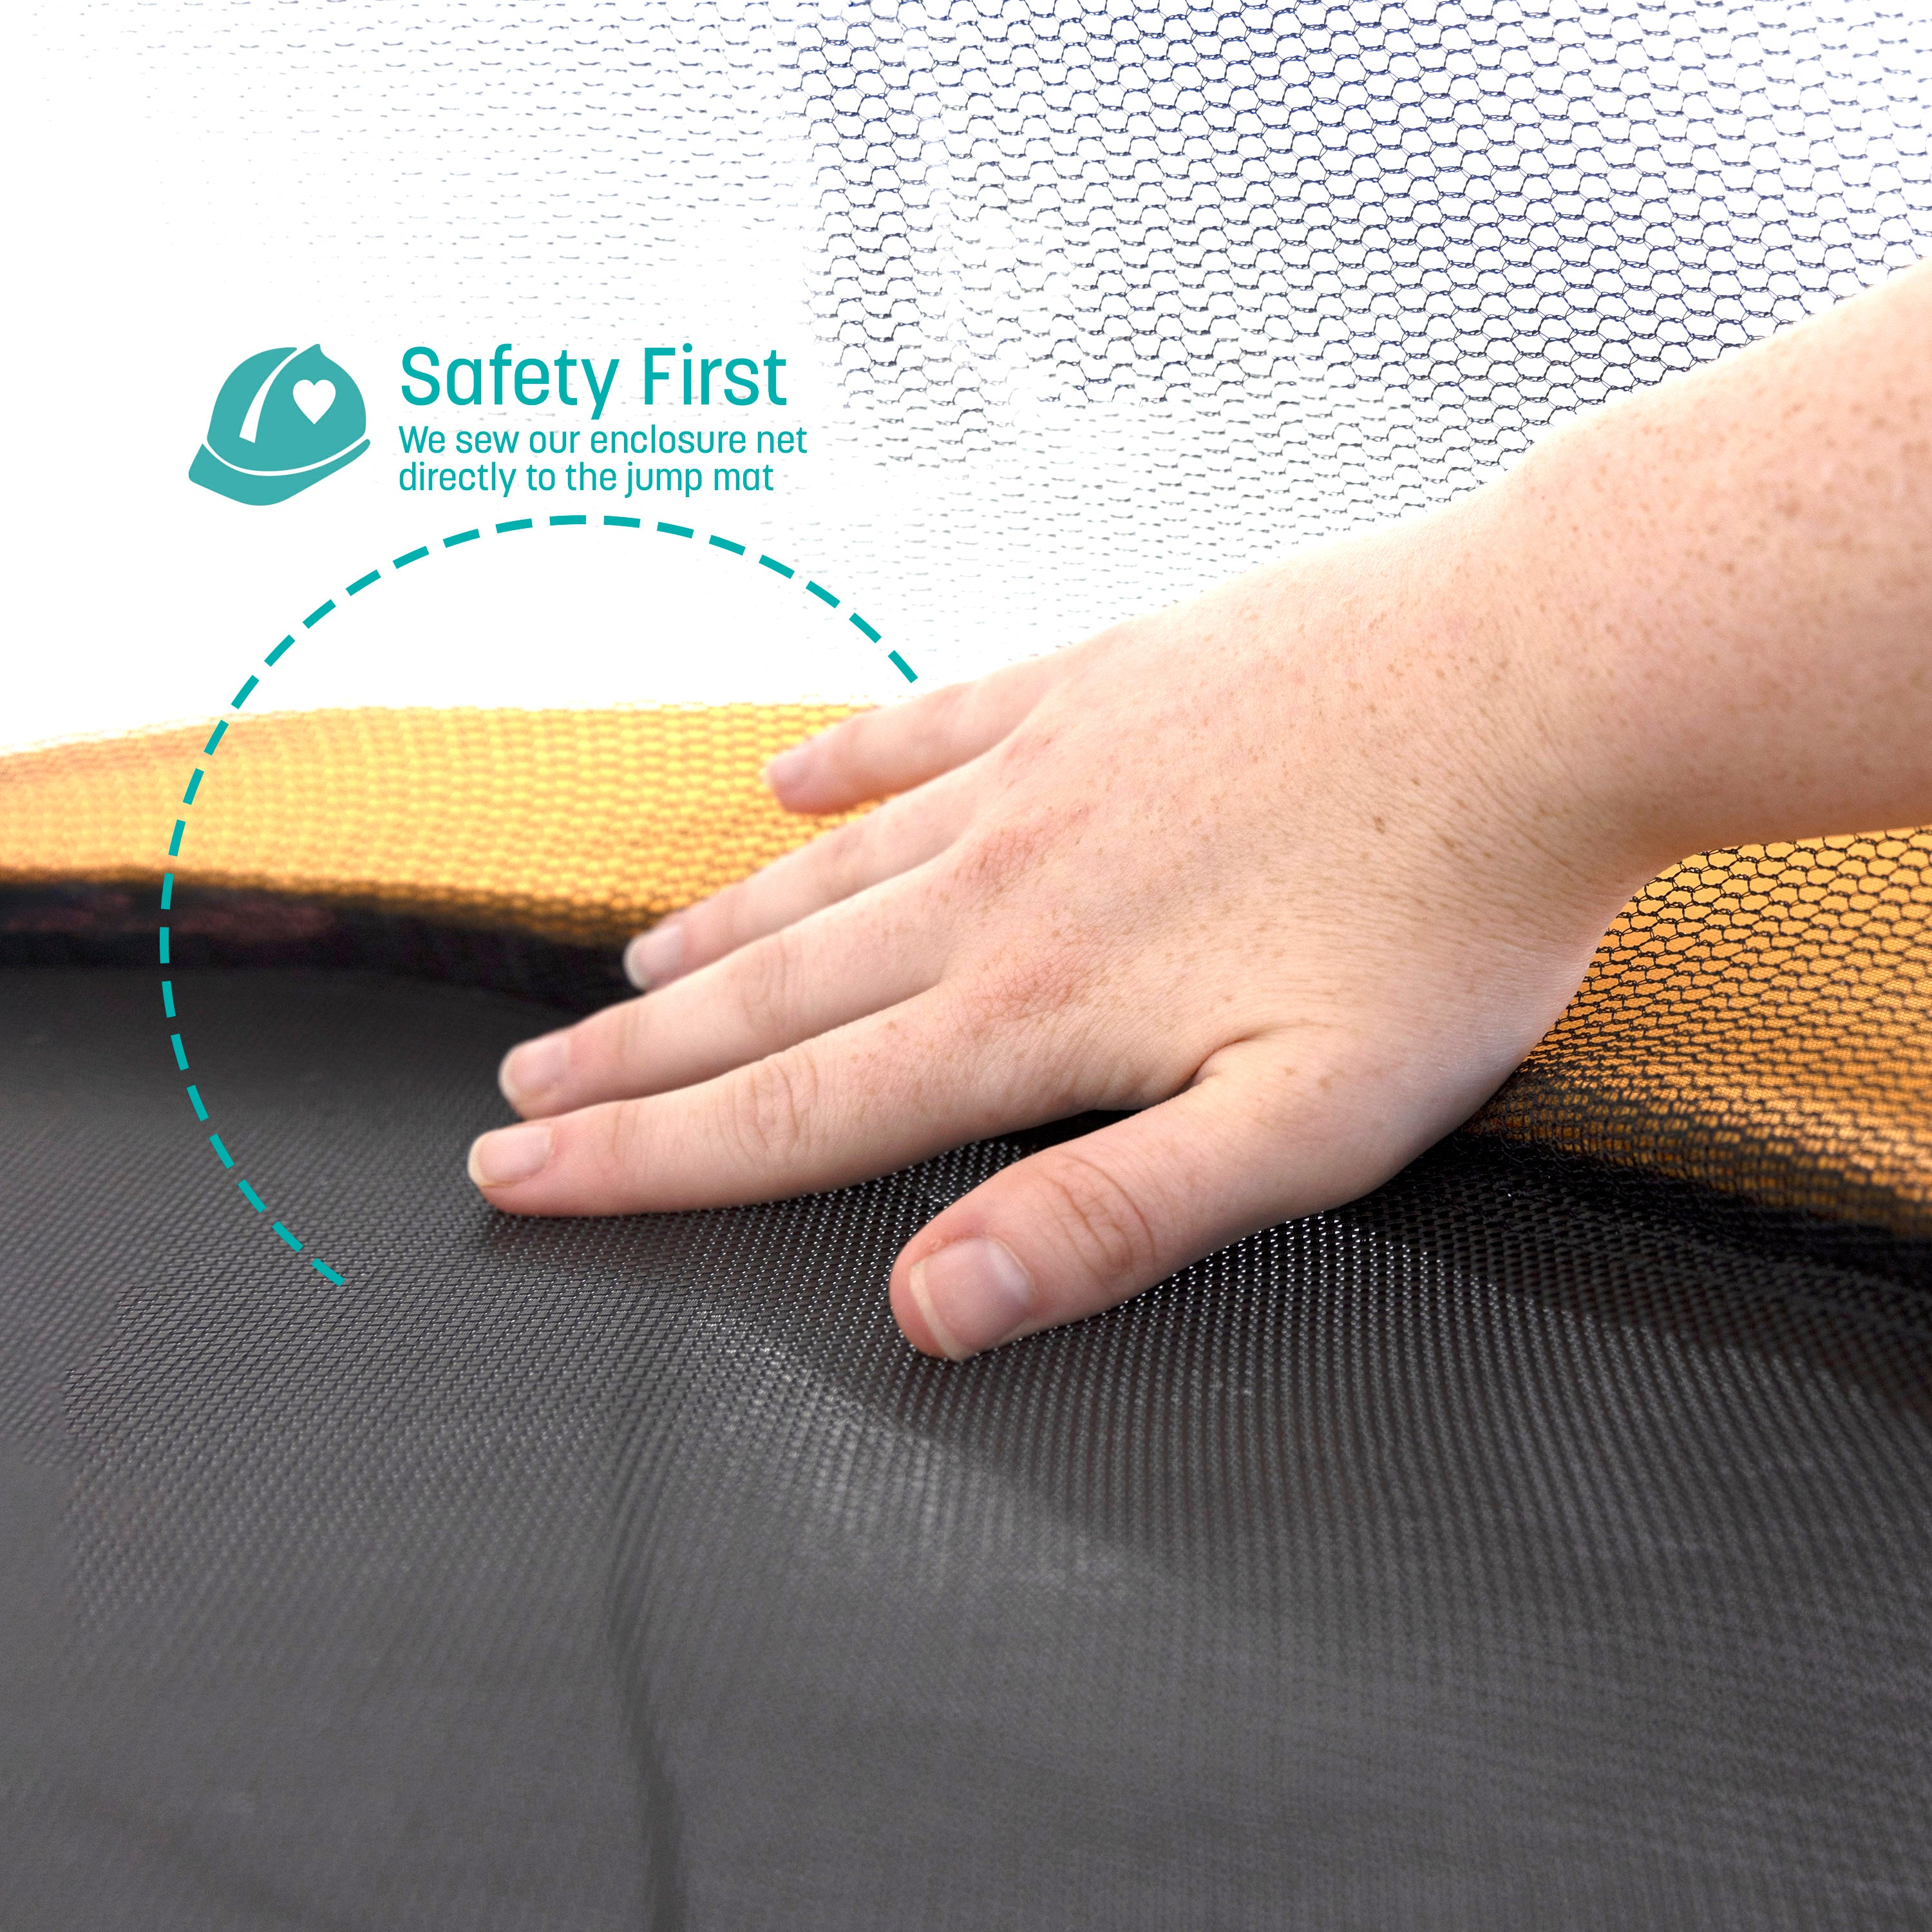 A hand pushes against the enclosure net. A teal callout feature states, “Safety First: We sew our enclosure net directly to the jump mat”.